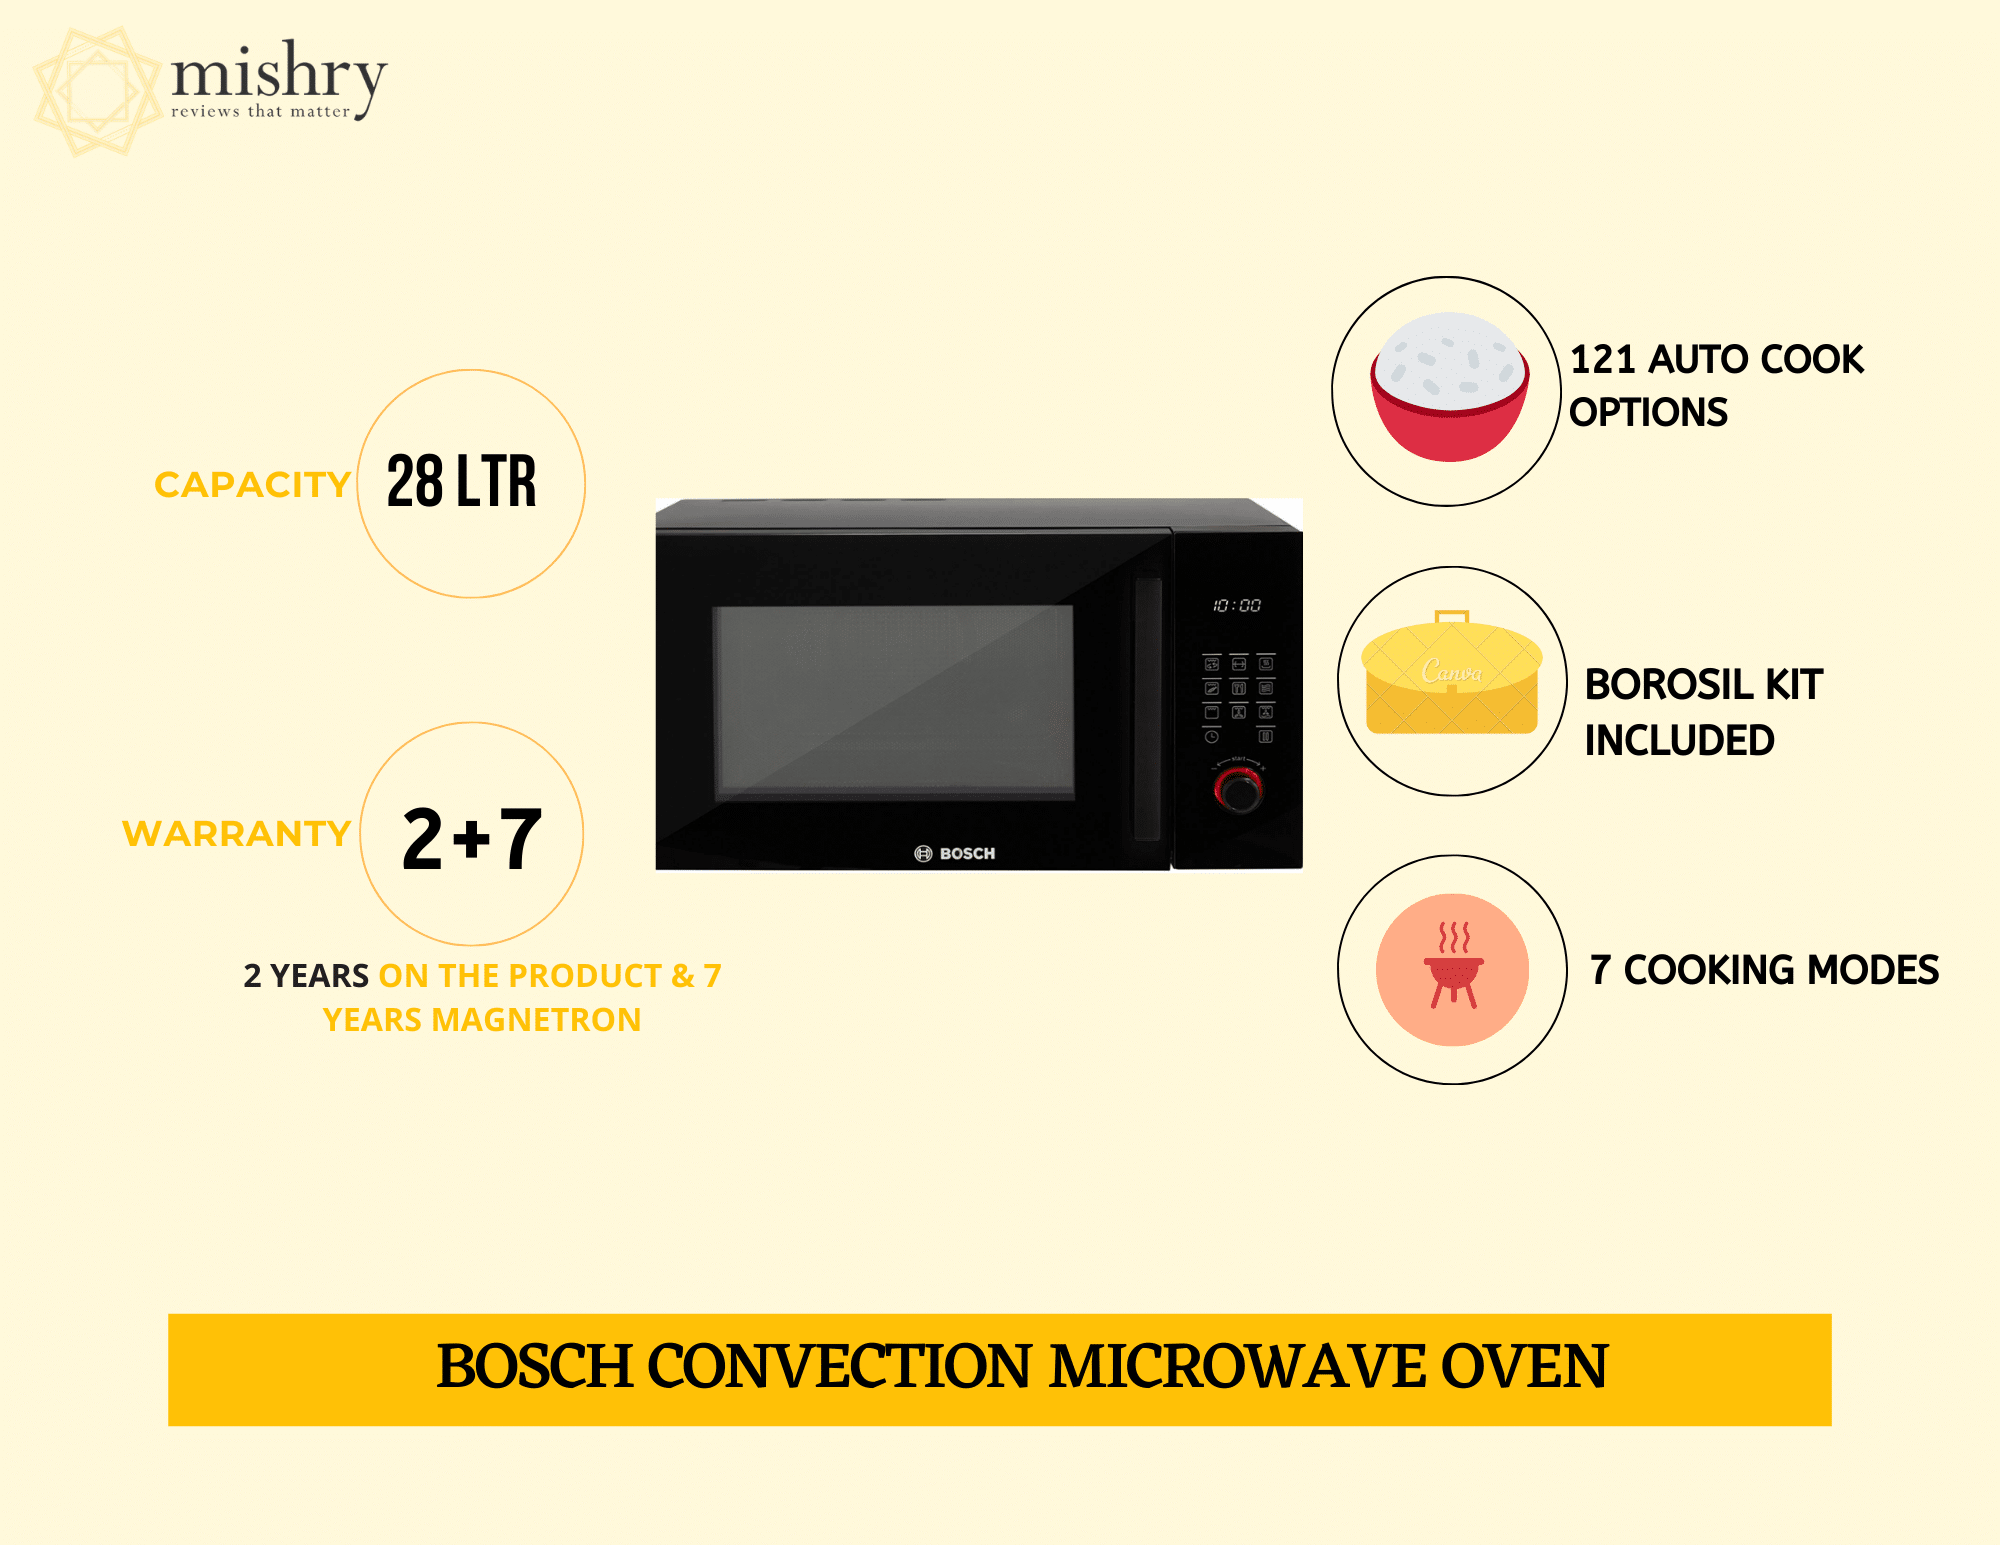 20 Best Microwave Ovens in India 2020 - Reviews and Buying Guide